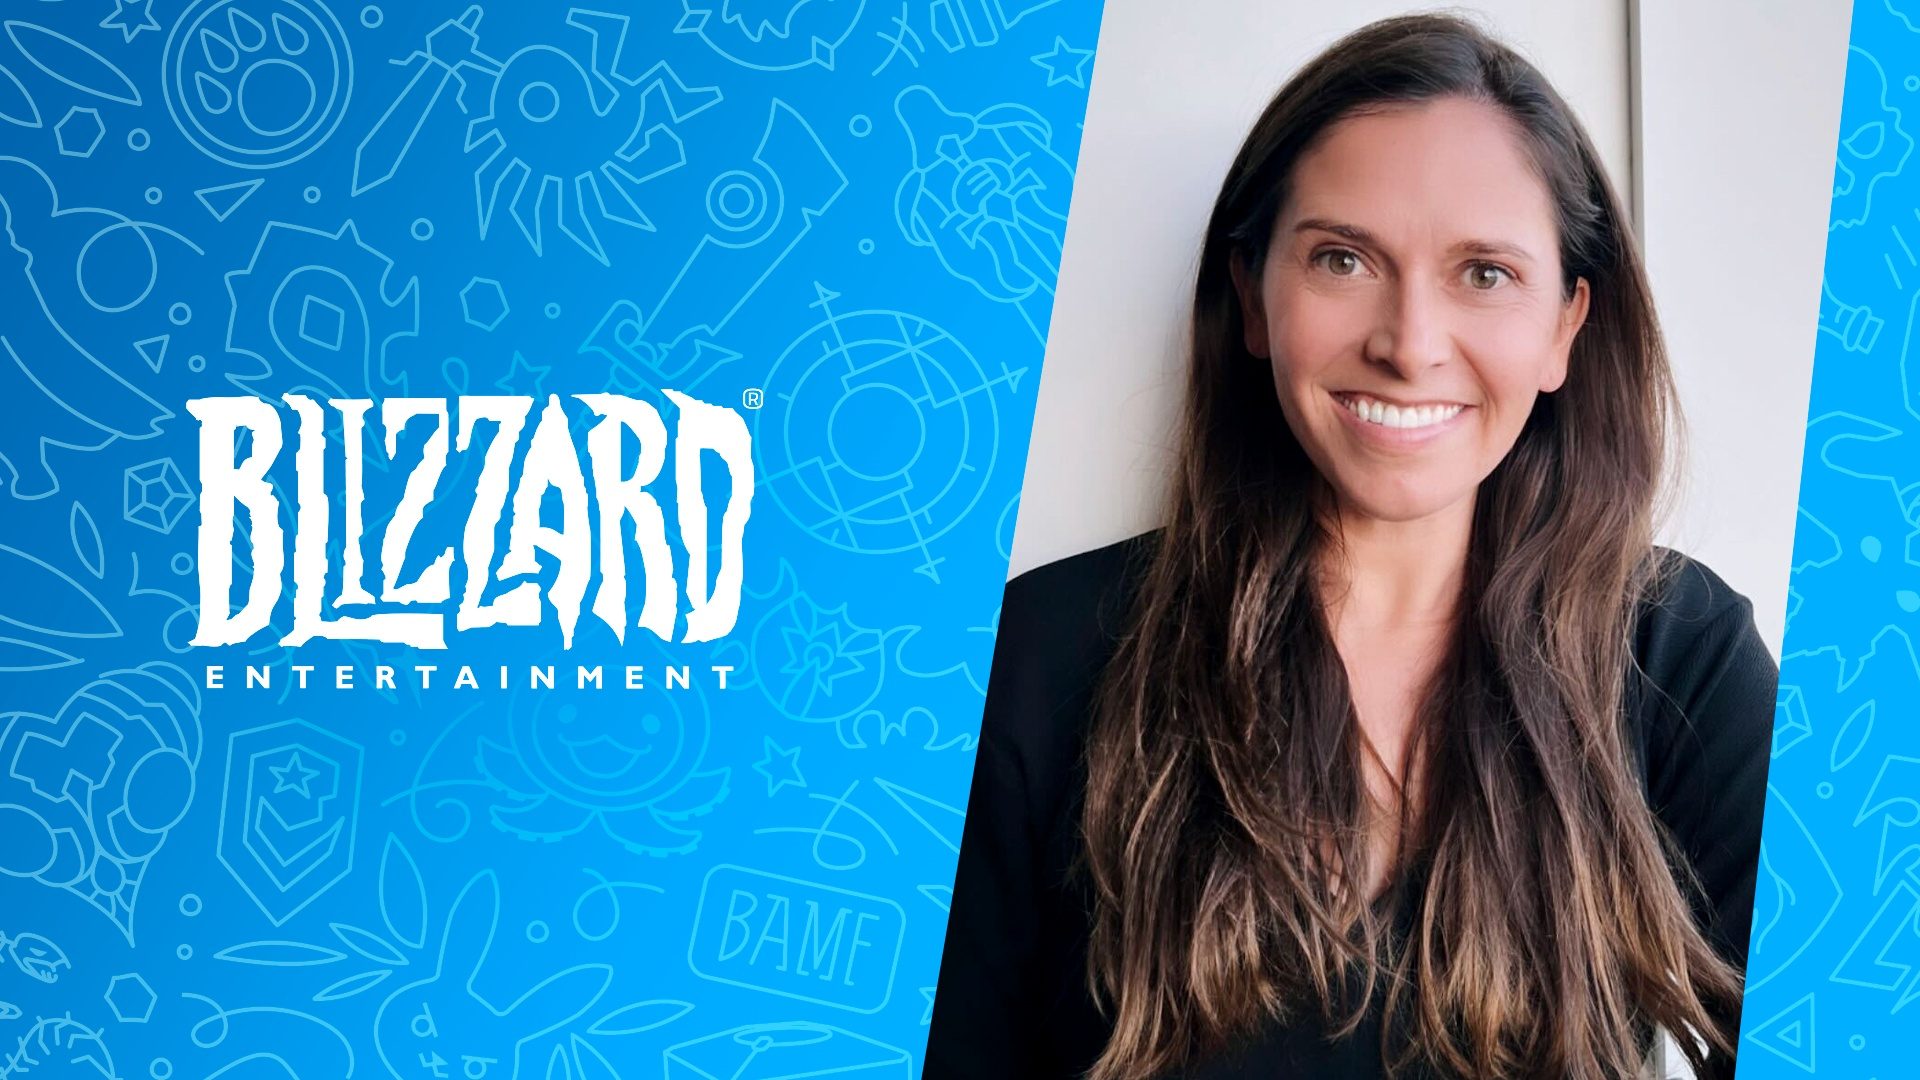 Jessica Martinez becomes Blizzard’s first Director of Culture